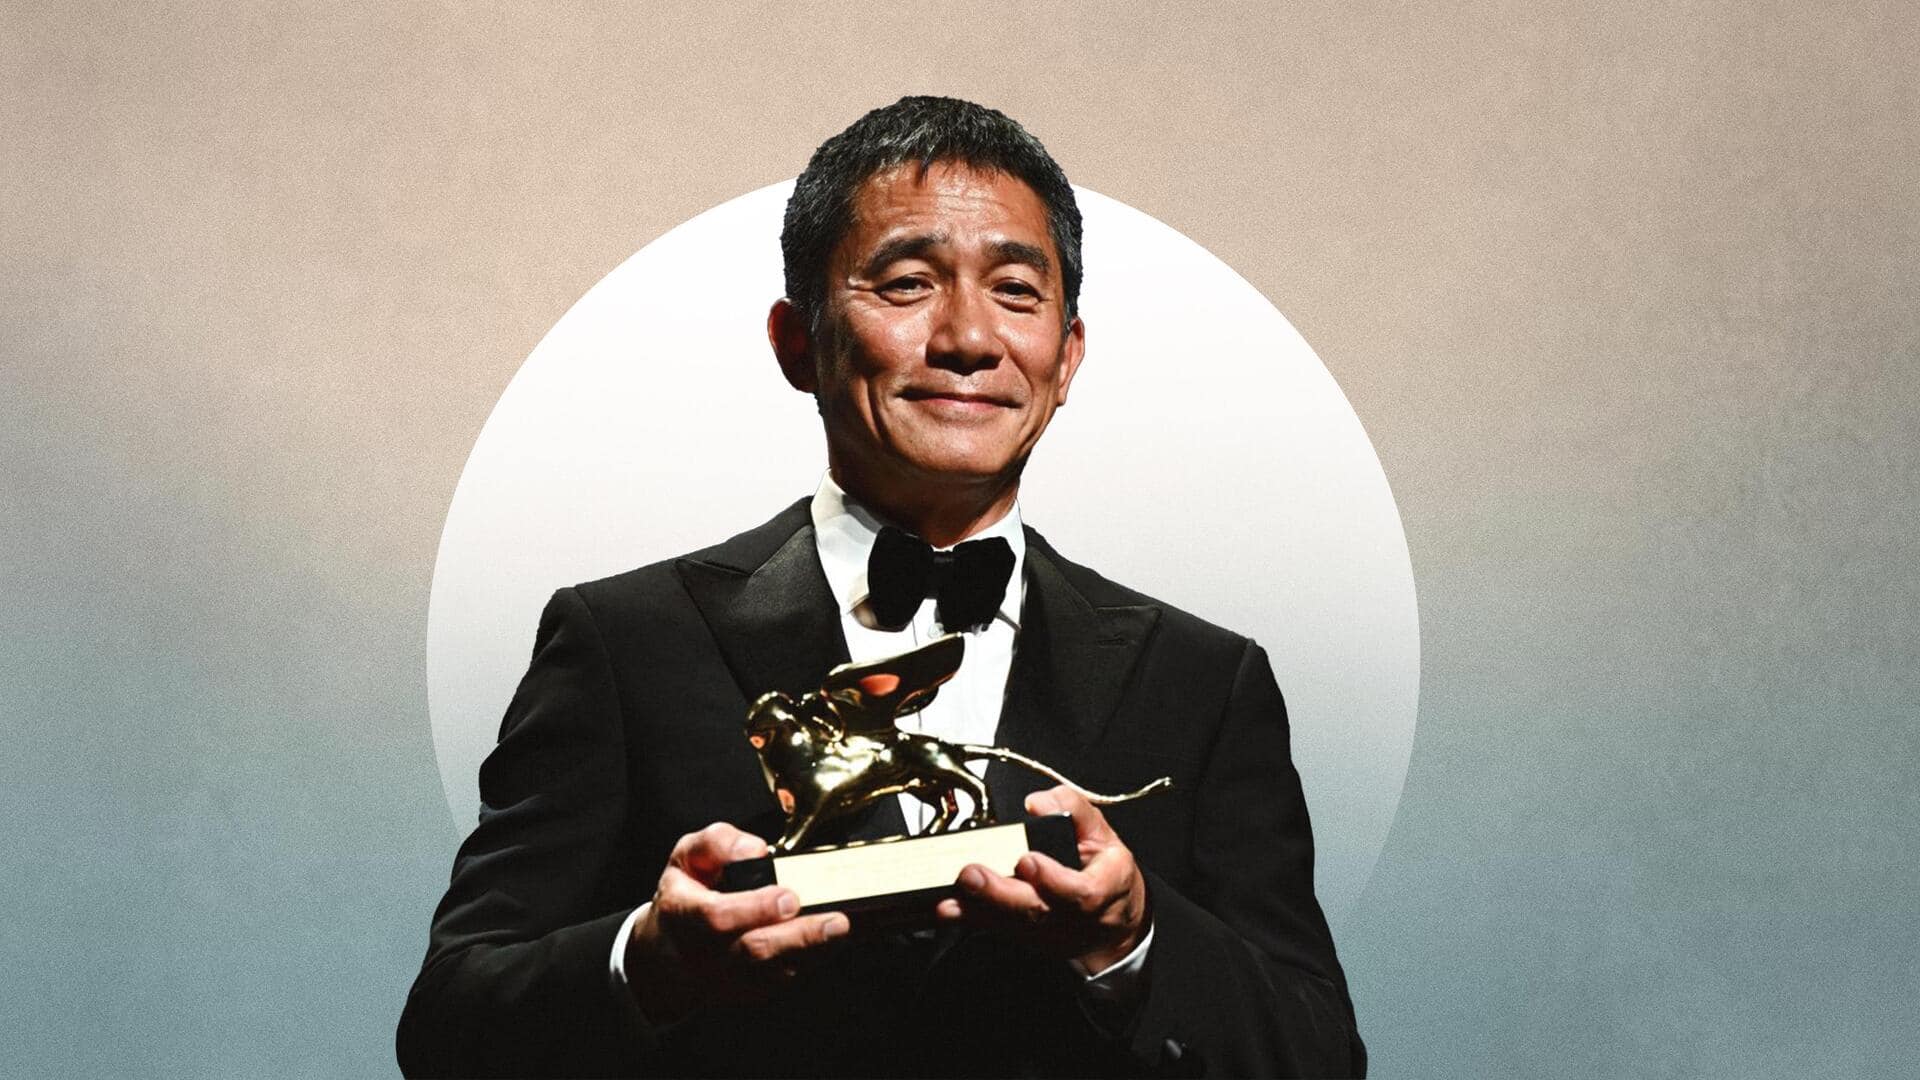 Tony Leung bags Lifetime Achievement Award at #VeniceFilmFestival—career, filmography, accolades